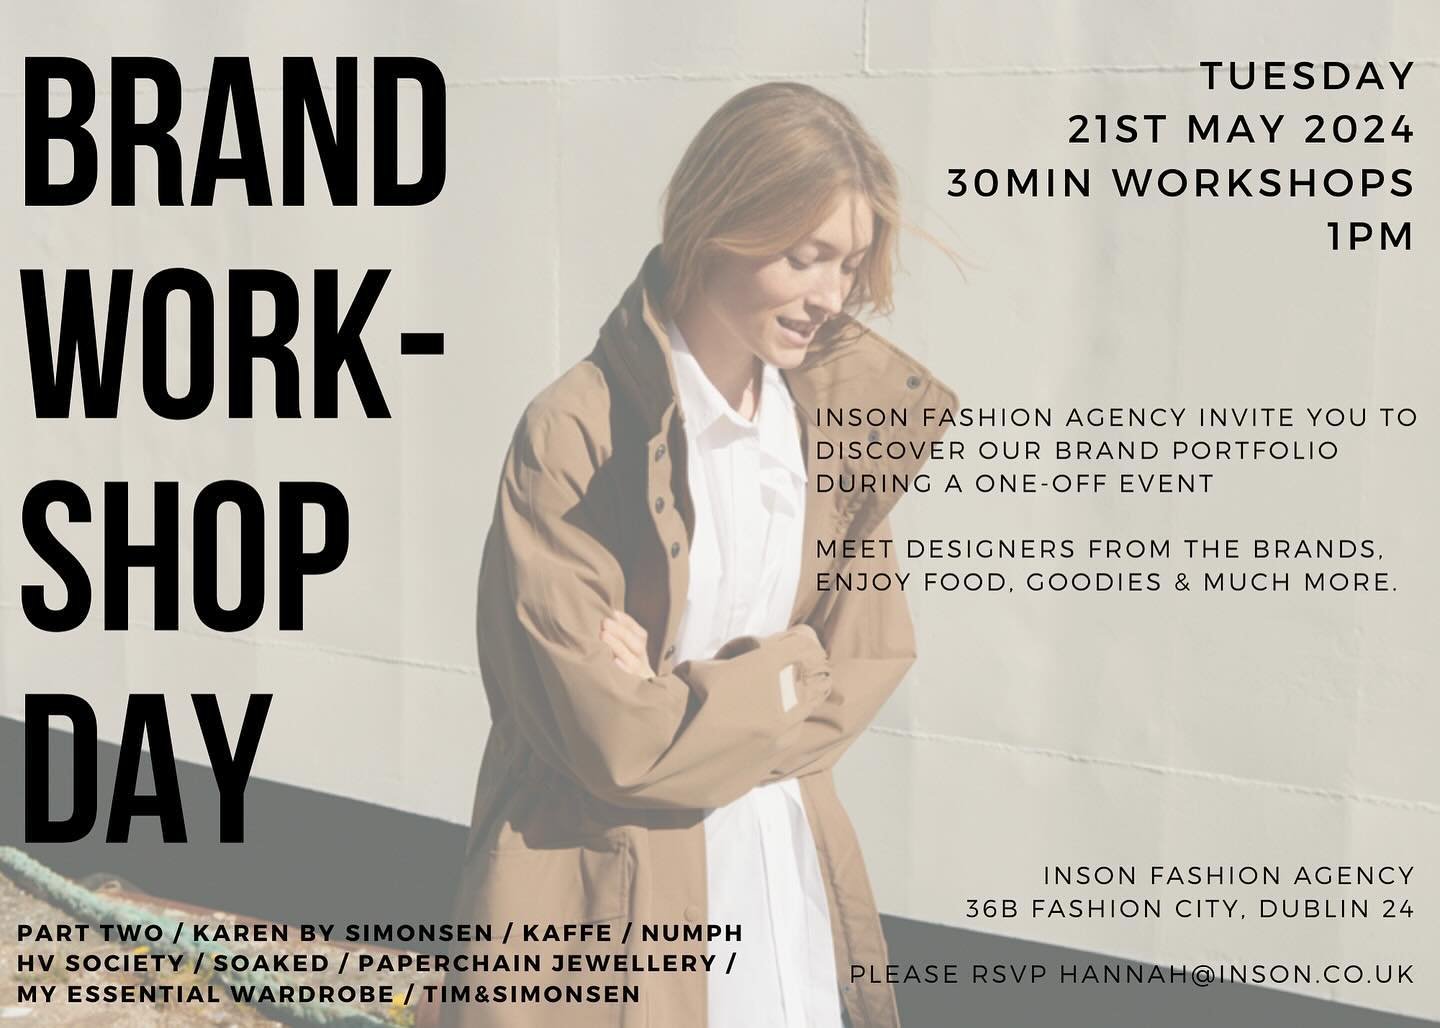 YOU&rsquo;RE INVITED
We want to equip our stockists with tips, inspiration and knowledge to feel confident to sell, sell, sell! That&rsquo;s why we&rsquo;ve invited an expert from lots of our brands to come over and workshop with you all. Whether you